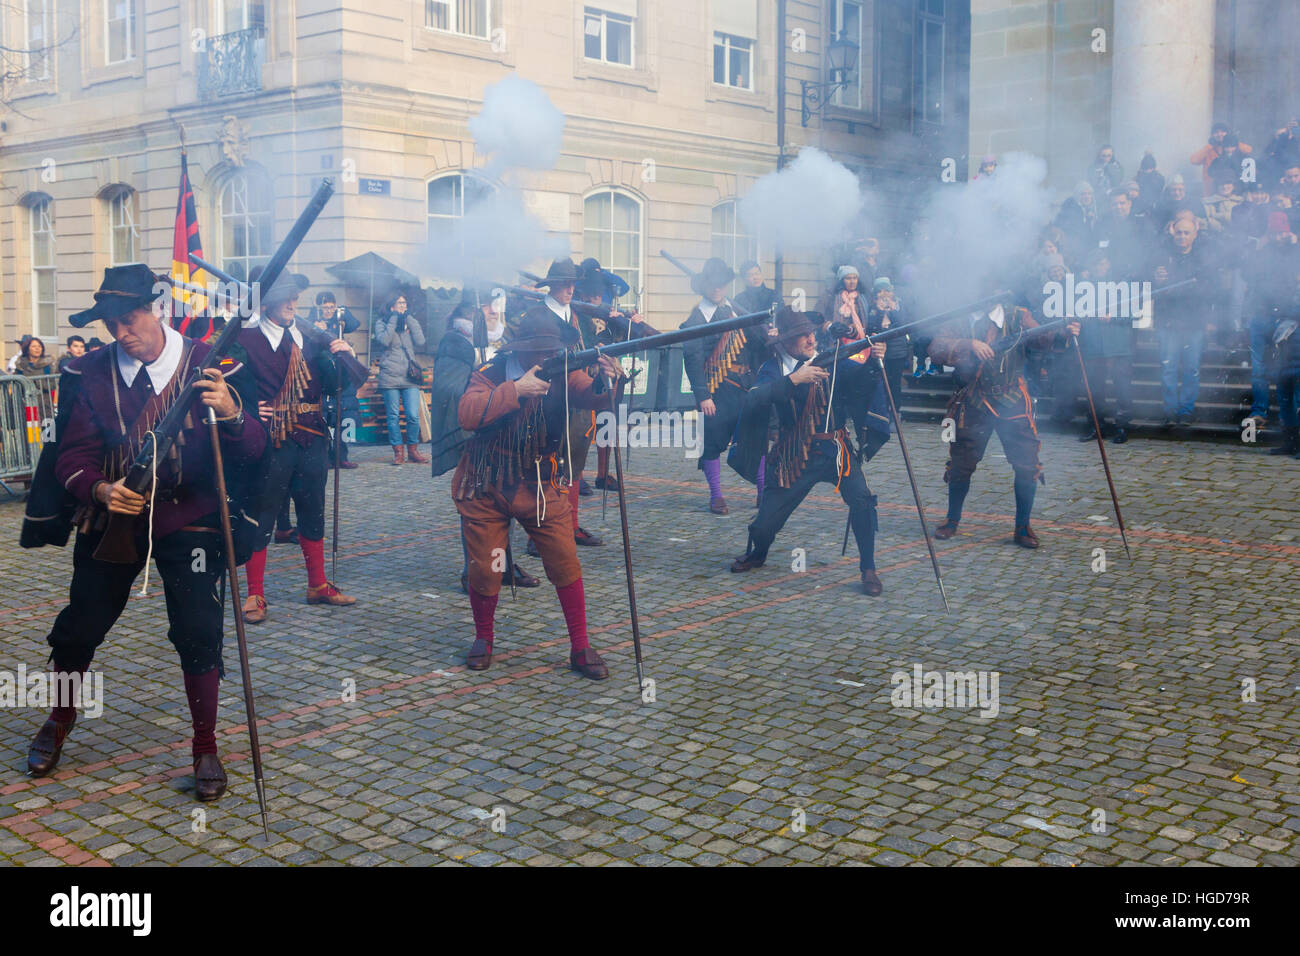 Musketeers firing their guns during Escalade celebrations Stock Photo